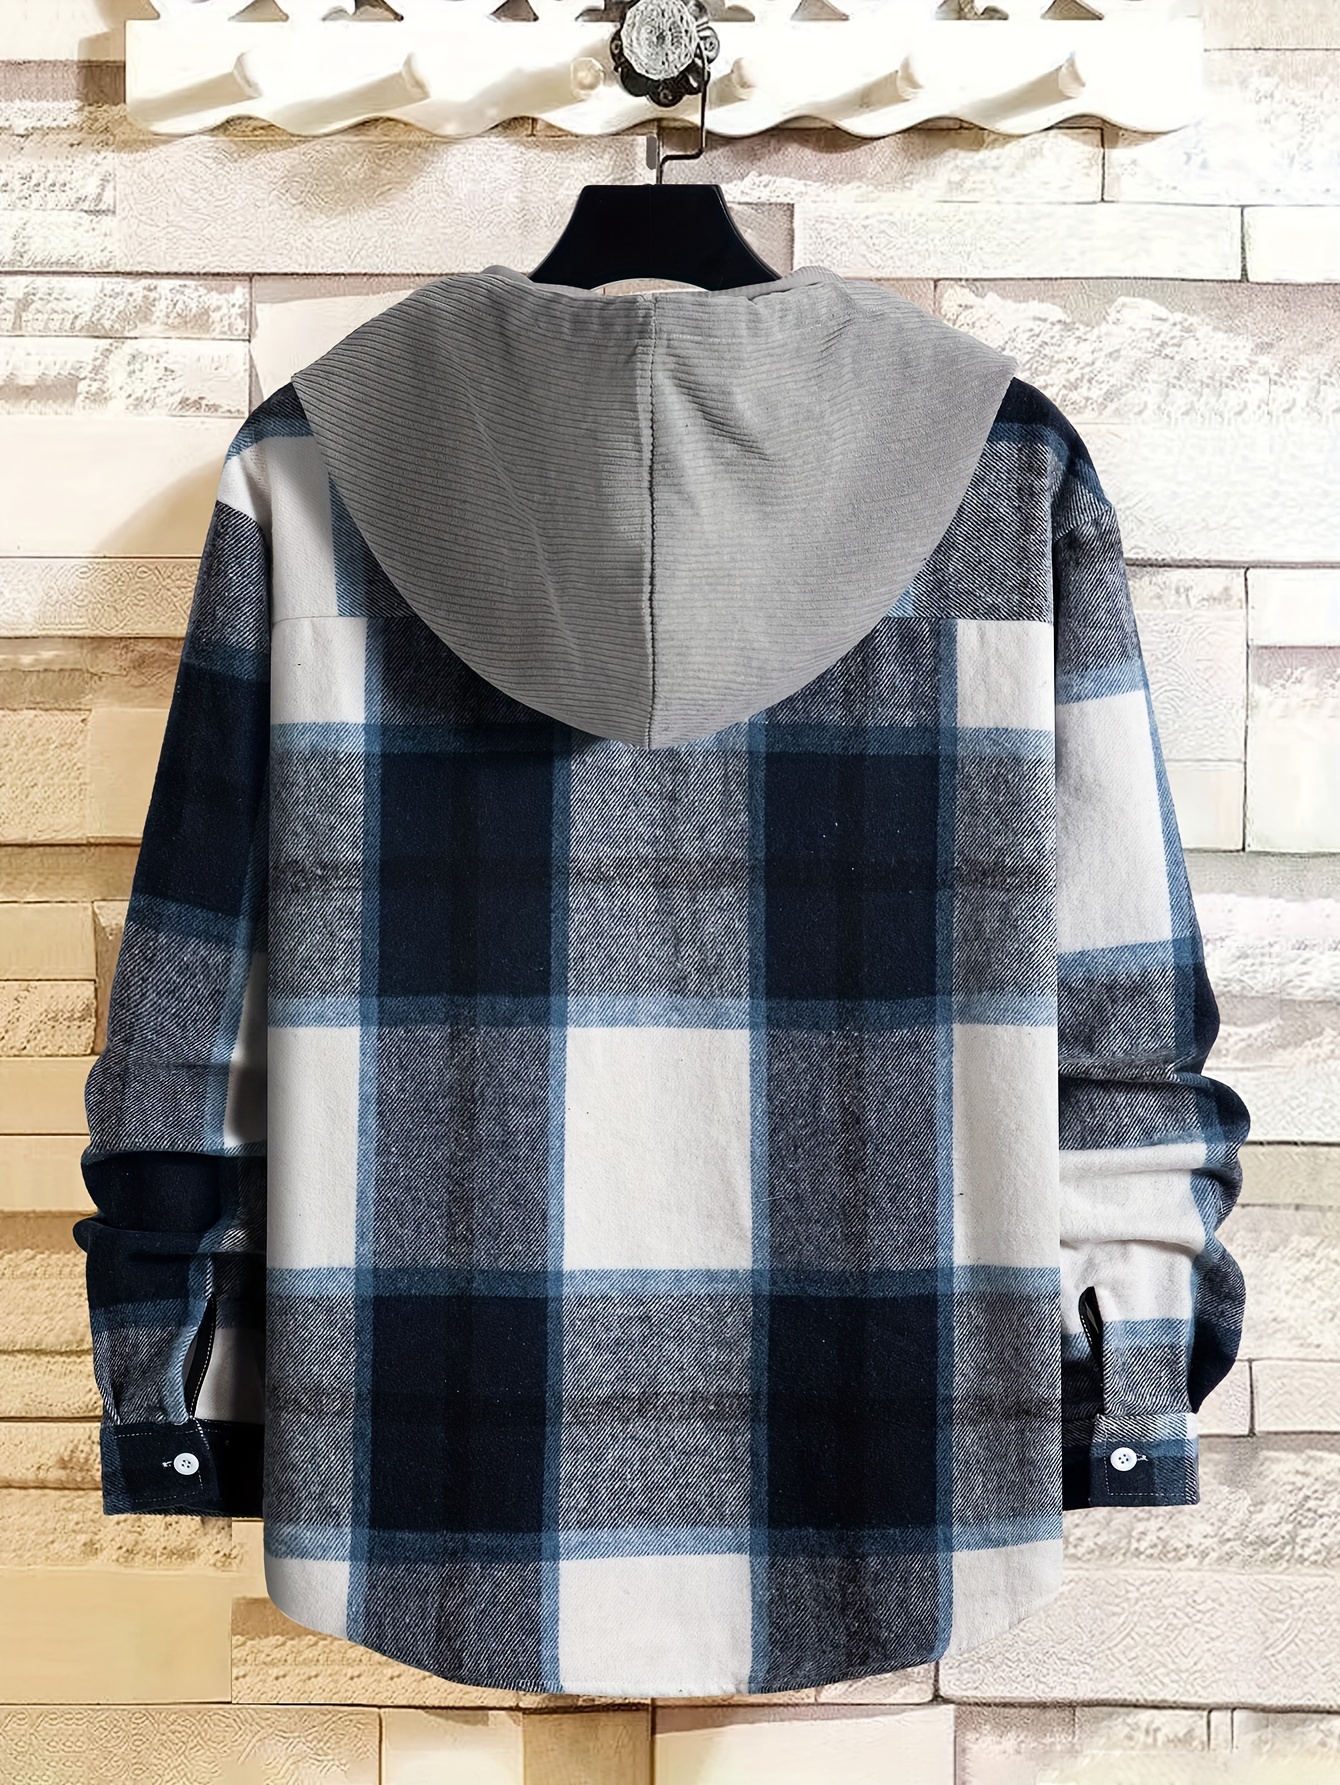 Plaid Shirt Coat For Men Long Sleeve Casual Regular Fit Button Up Hooded Shirts Jacket